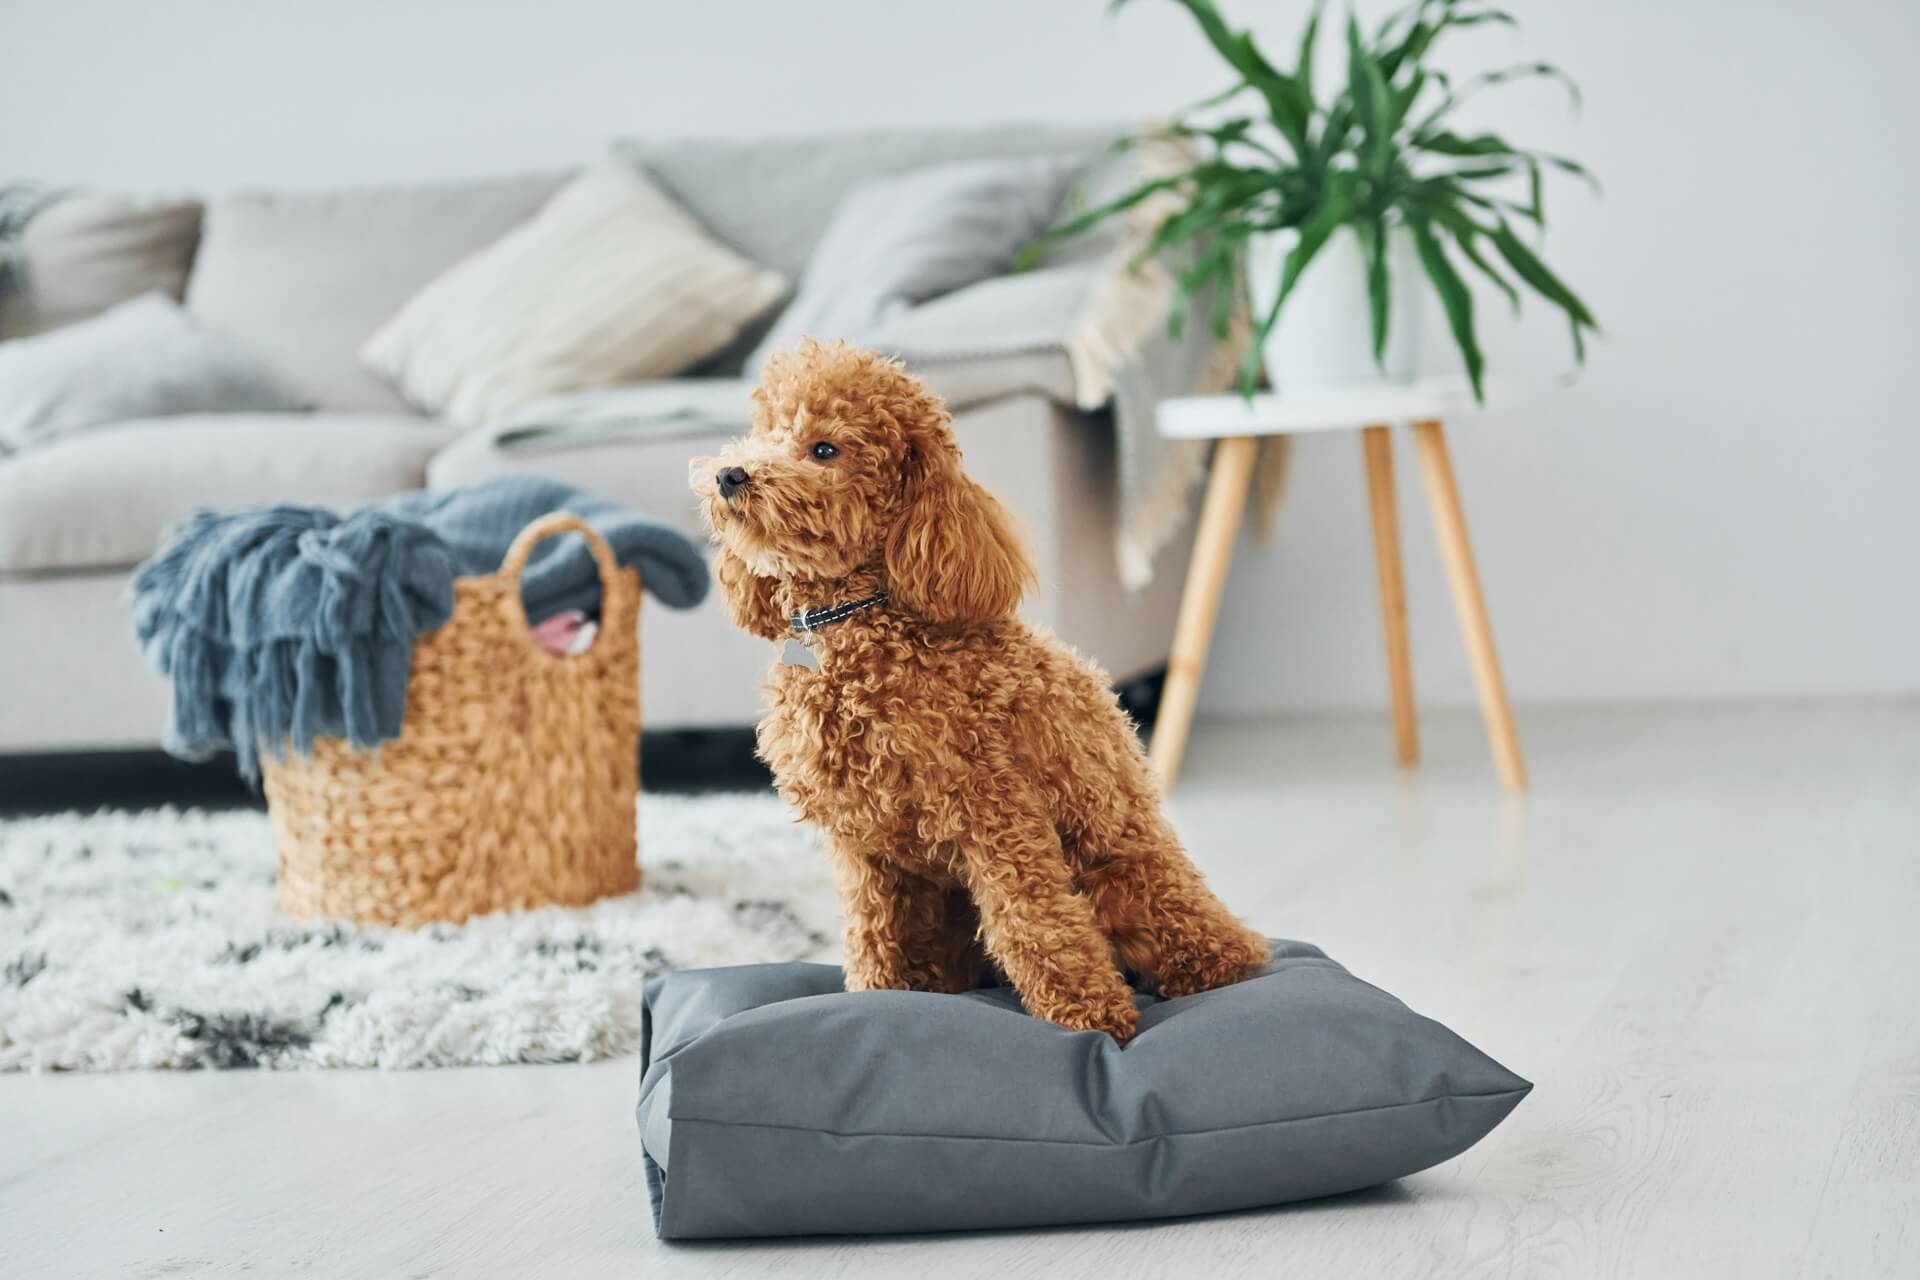 Fluffy brown dog sitting on gray pillow in modern living room